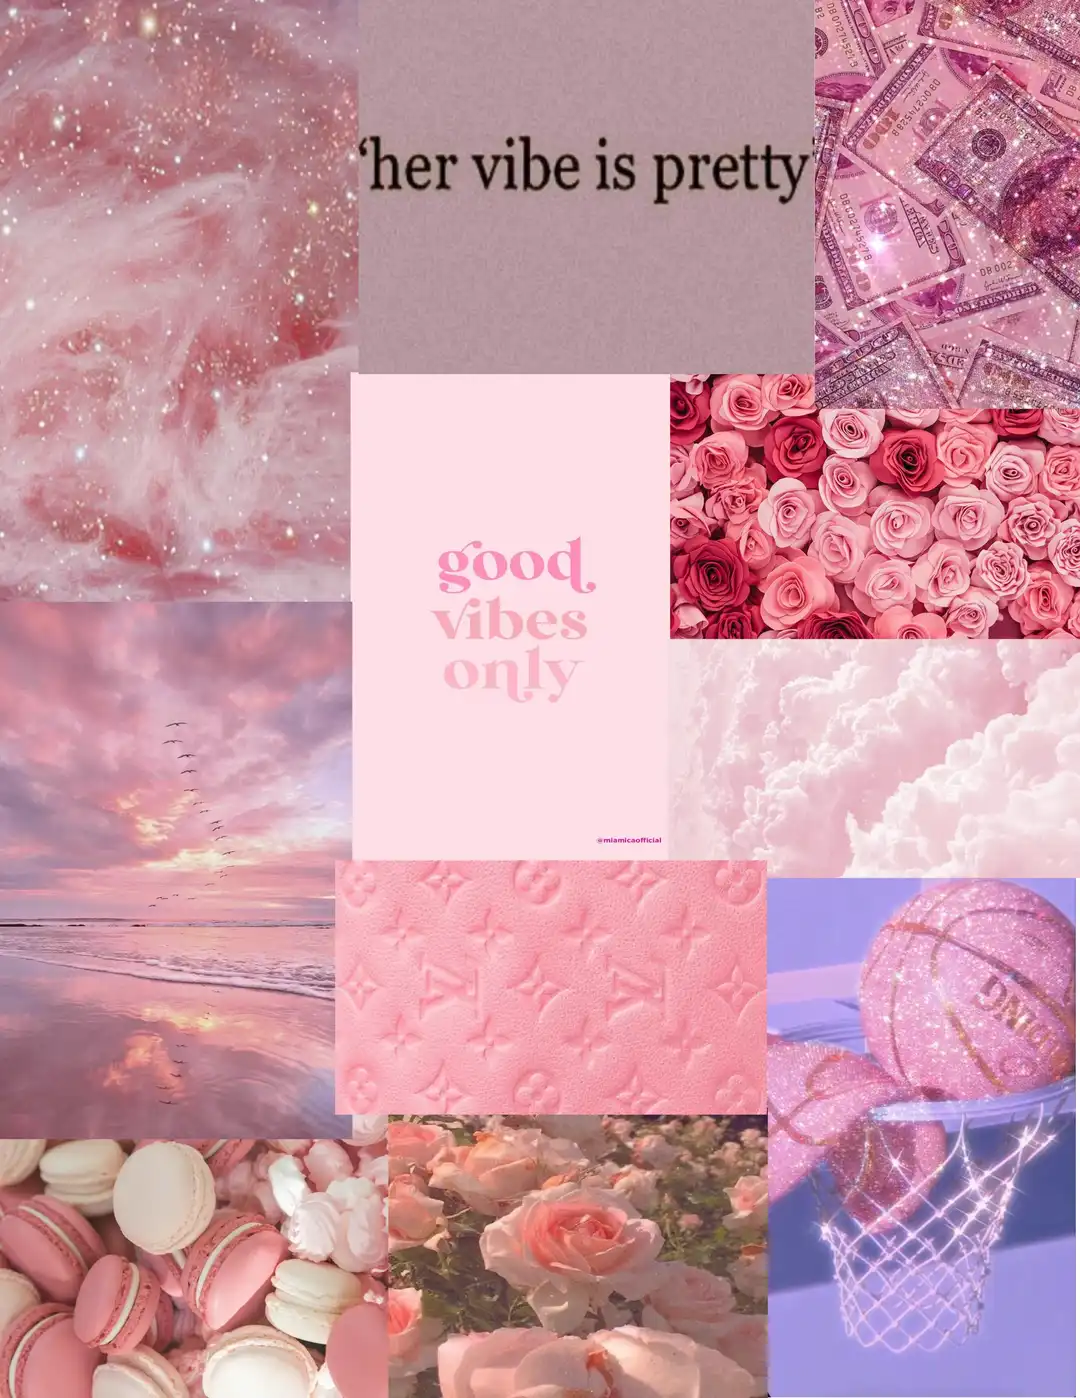 Aesthetic background with pink and purple images and the words 